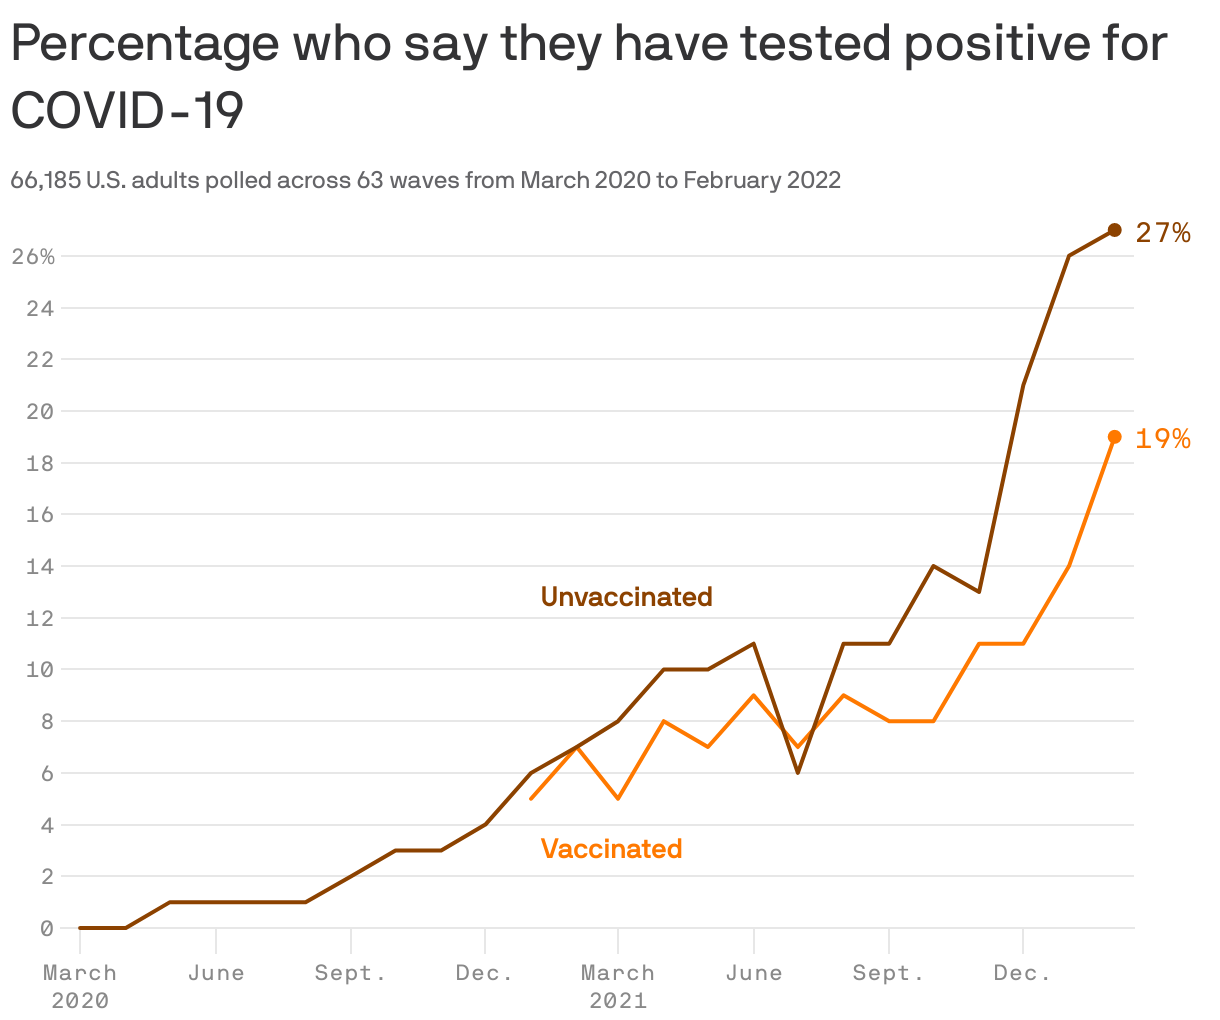 Percentage who say they have tested positive for COVID-19